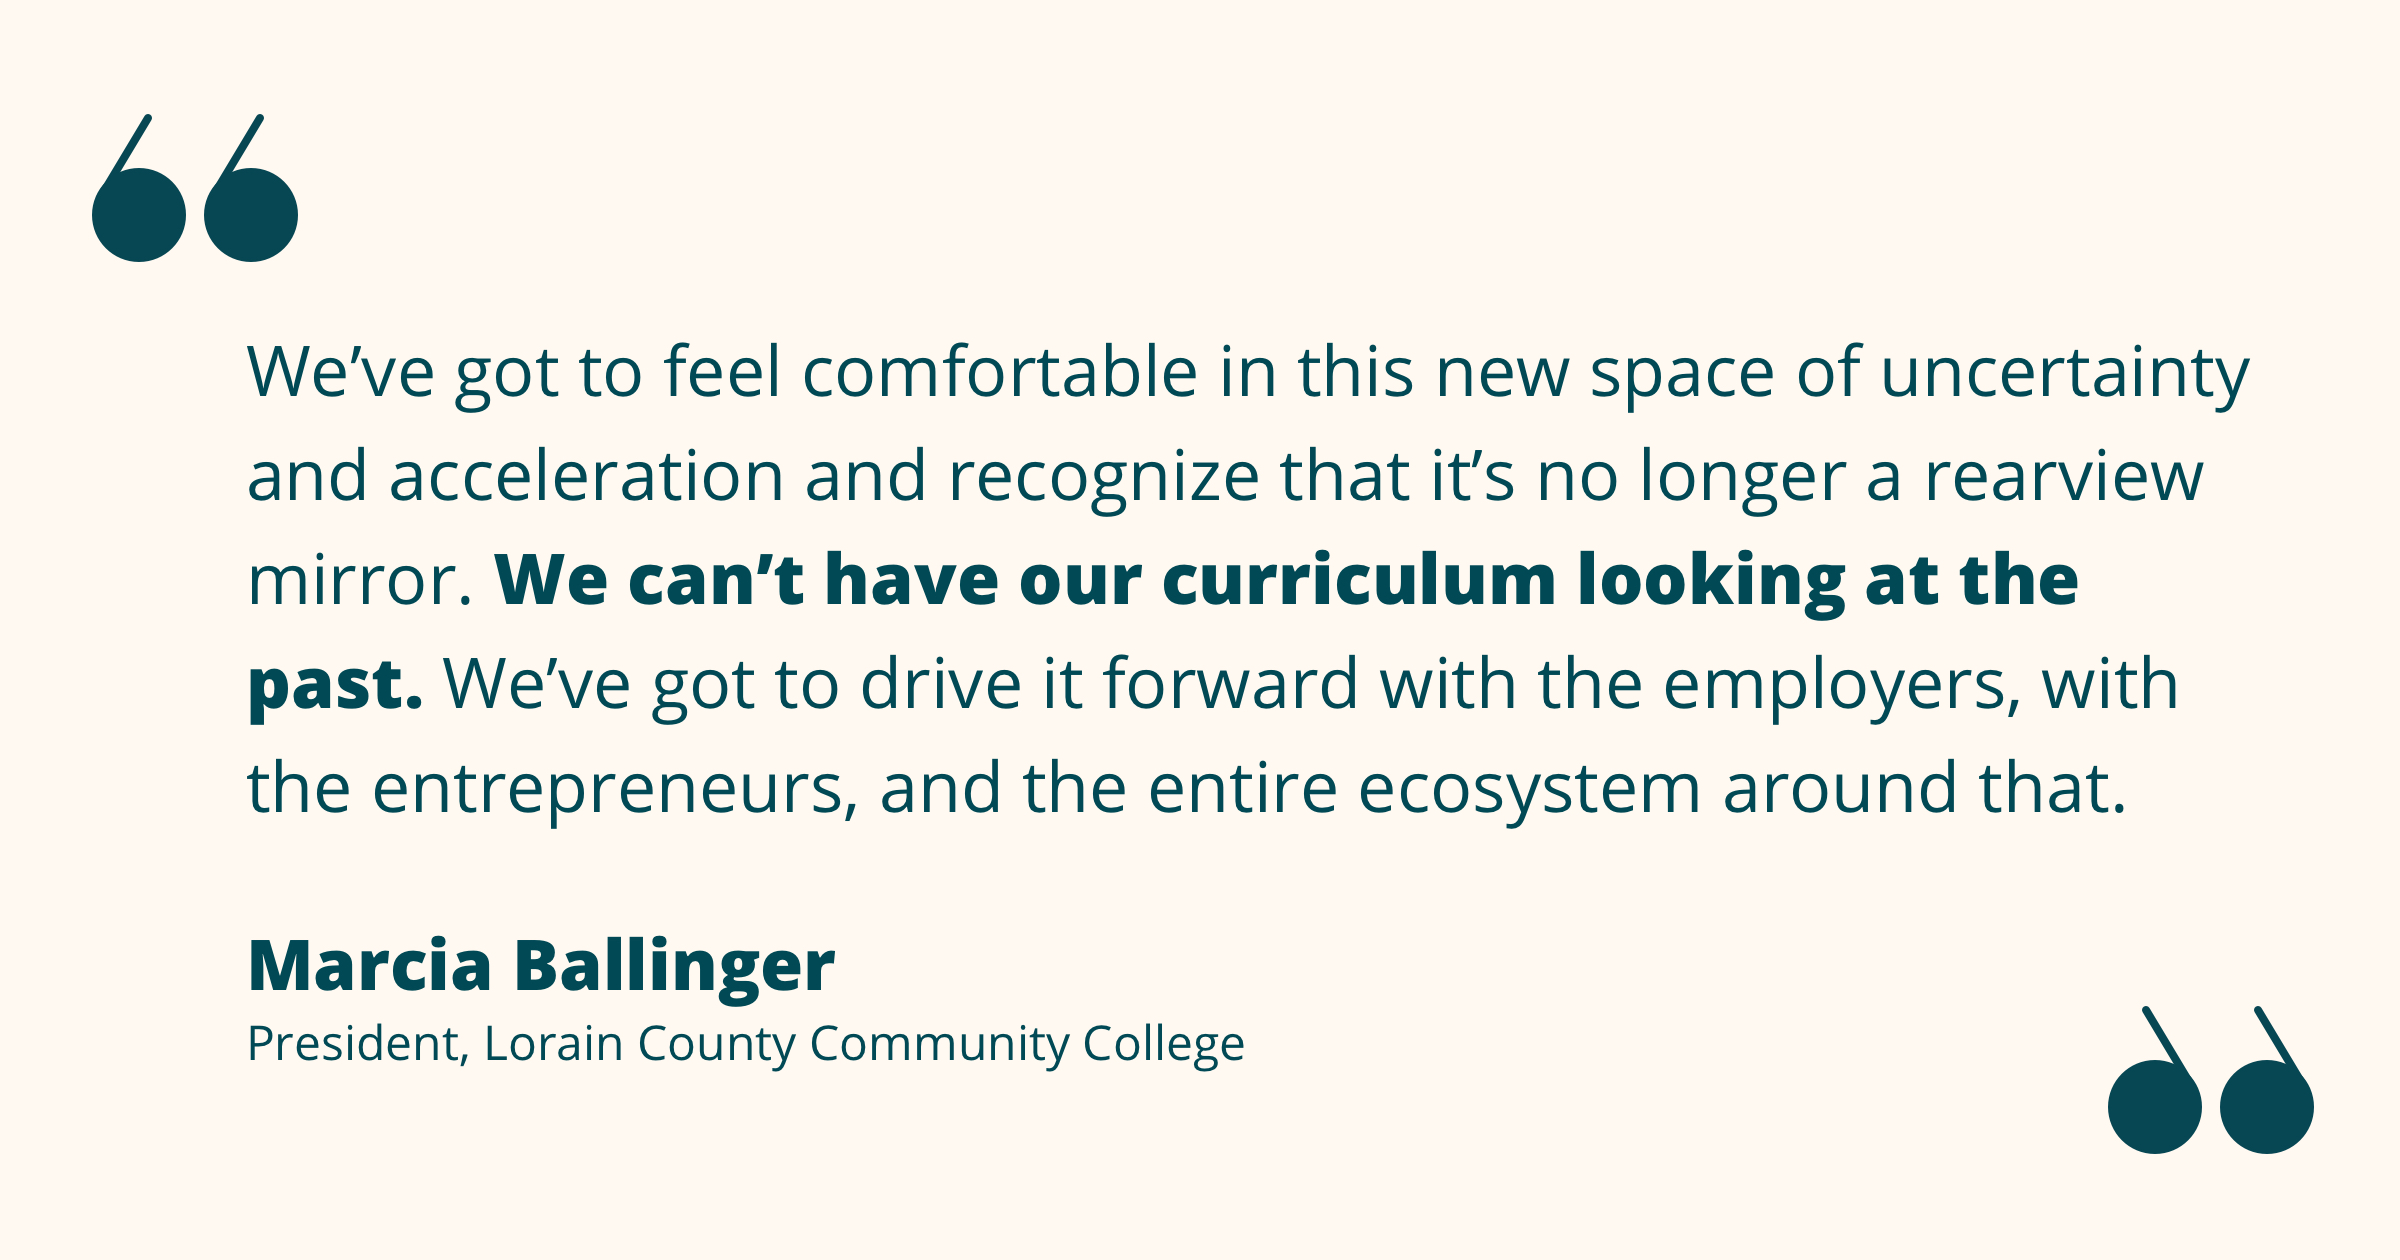 Quote from Marcia Ballinger re: a forward-looking curriculum driven by the ecosystem of local employers and entrepreneurs.